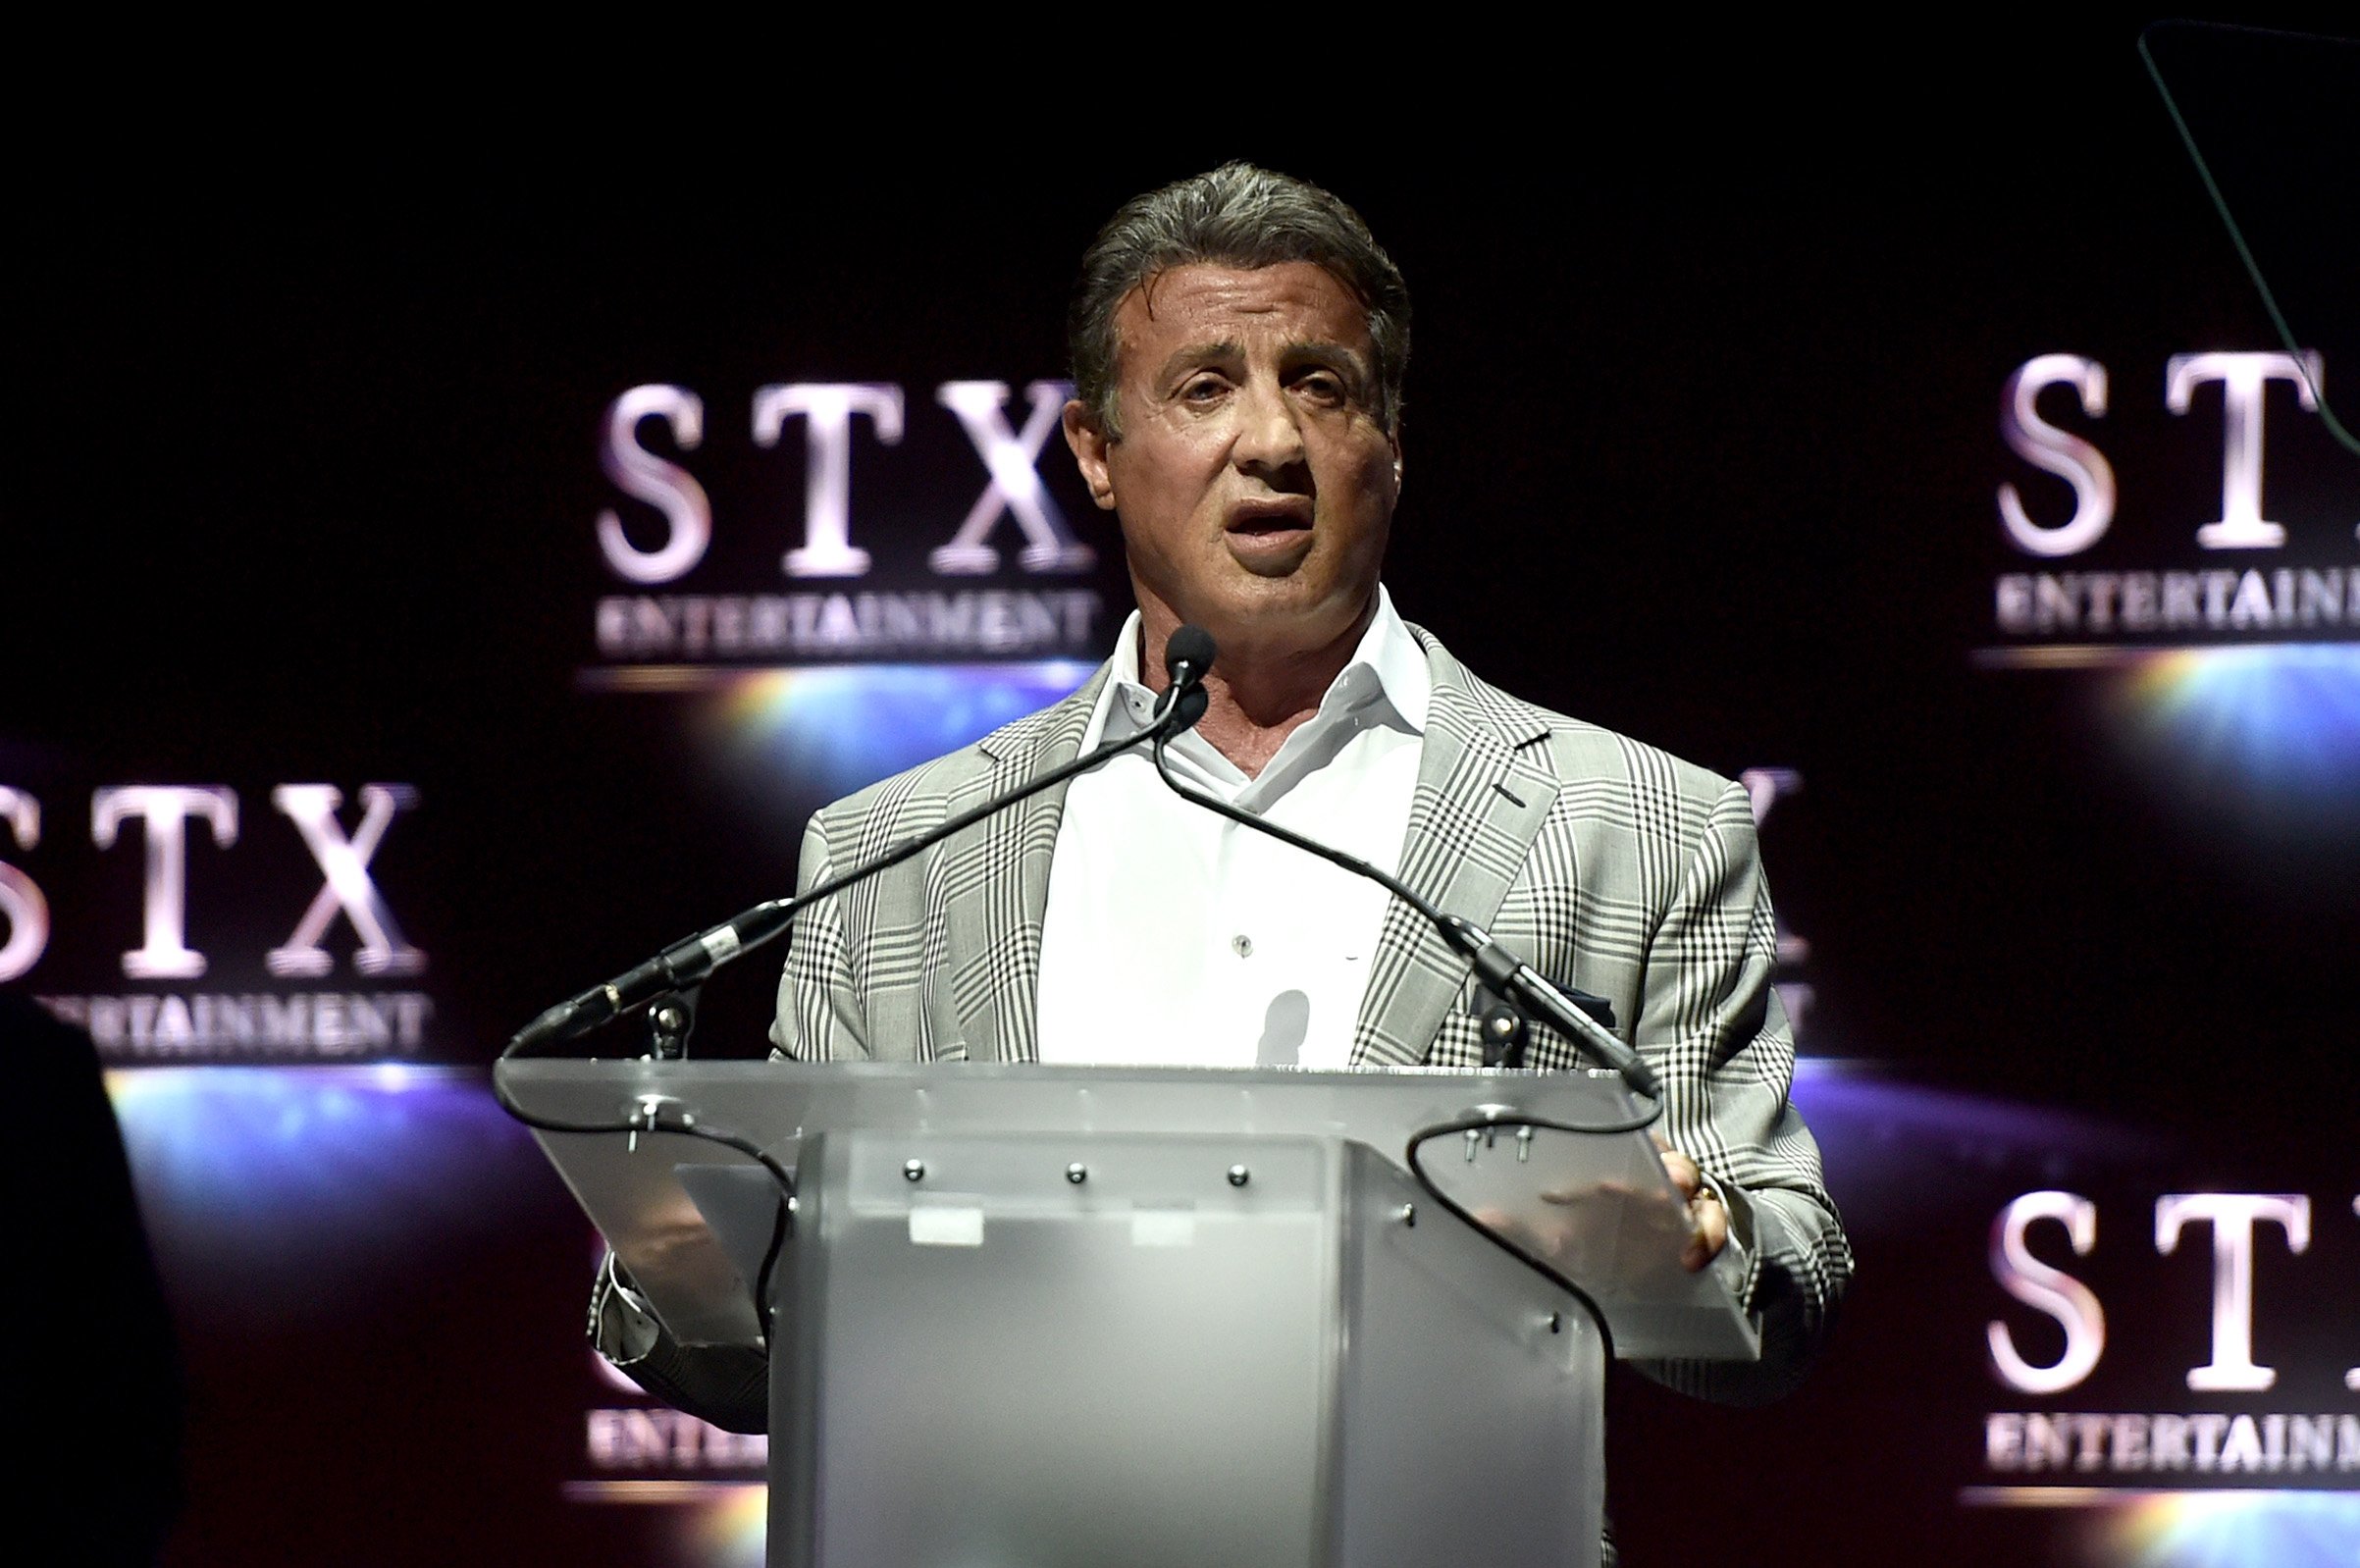 Sylvester Stallone speaks onstage at CinemaCon 2016 The State of the Industry: Past, Present and Future and STX Entertainment Presentation at The Colosseum at Caesars Palace during CinemaCon, on April, 12, 2016 in Las Vegas, Nevada | Photo: Getty Images